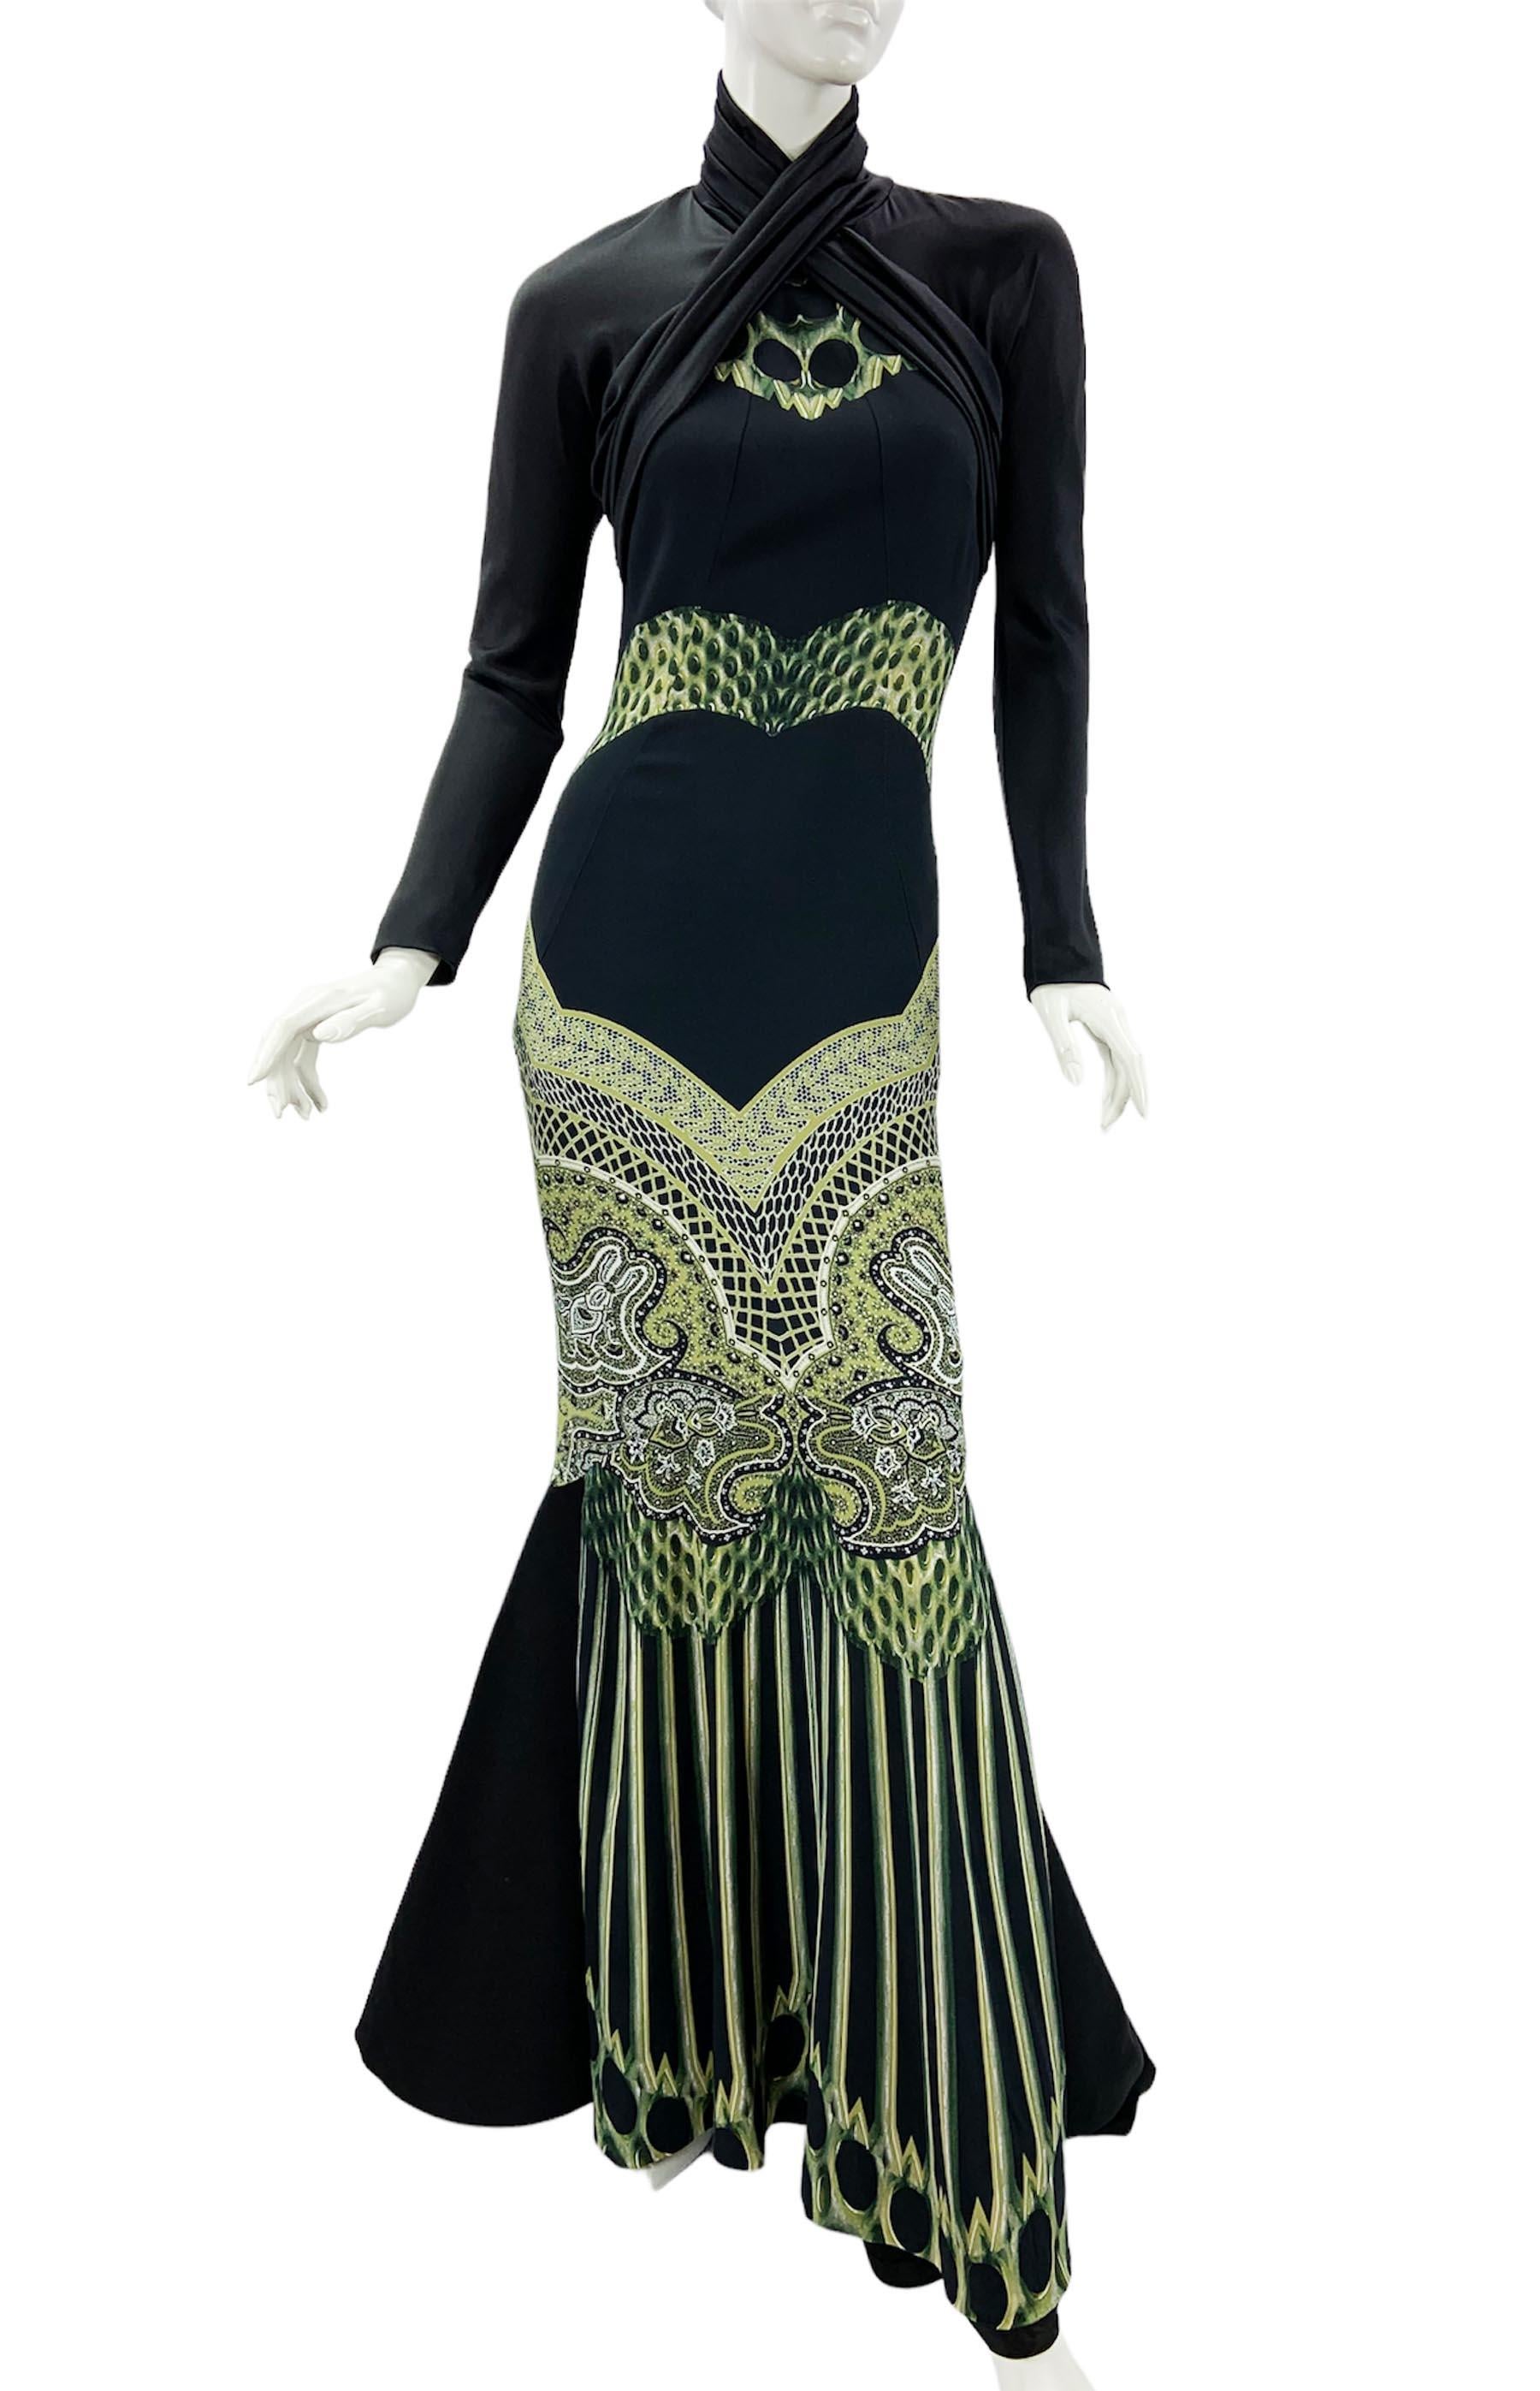 Etro Black Green Paisley Print Stretch Turtleneck Dress Gown
Italian size - 40
Black background with green paisley print, turtleneck style, back zip closure with decorative buttons, fully lined, fabric stretchy.
Measurements: length - 62 inches,